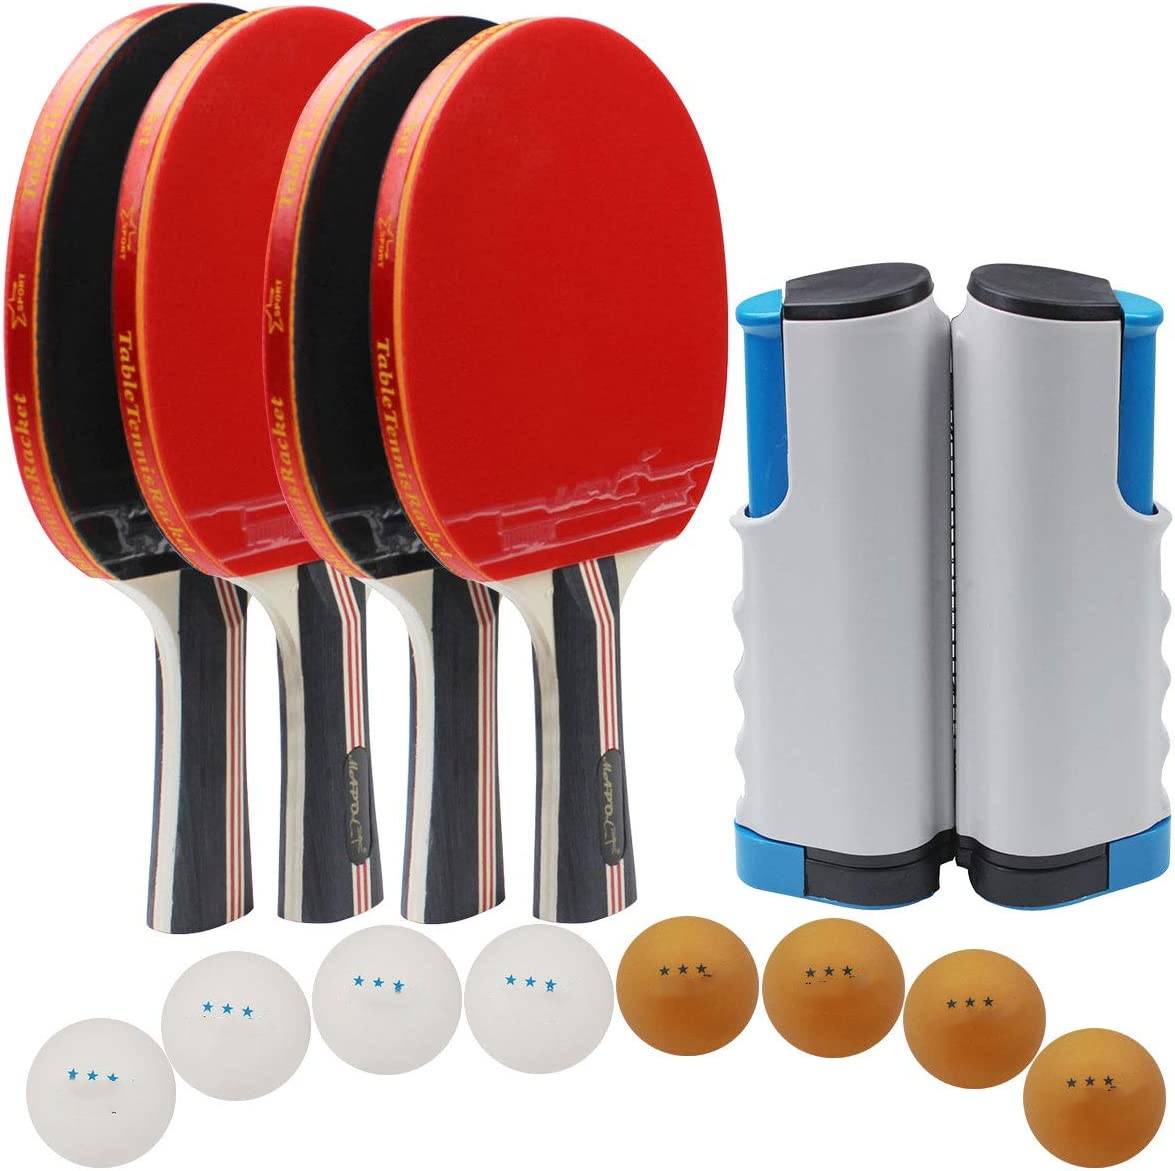 Wholesale good quality ping pong paddles, Ping Pong Net Set, Premium Paddles, suit for Family Friends Play or Competition